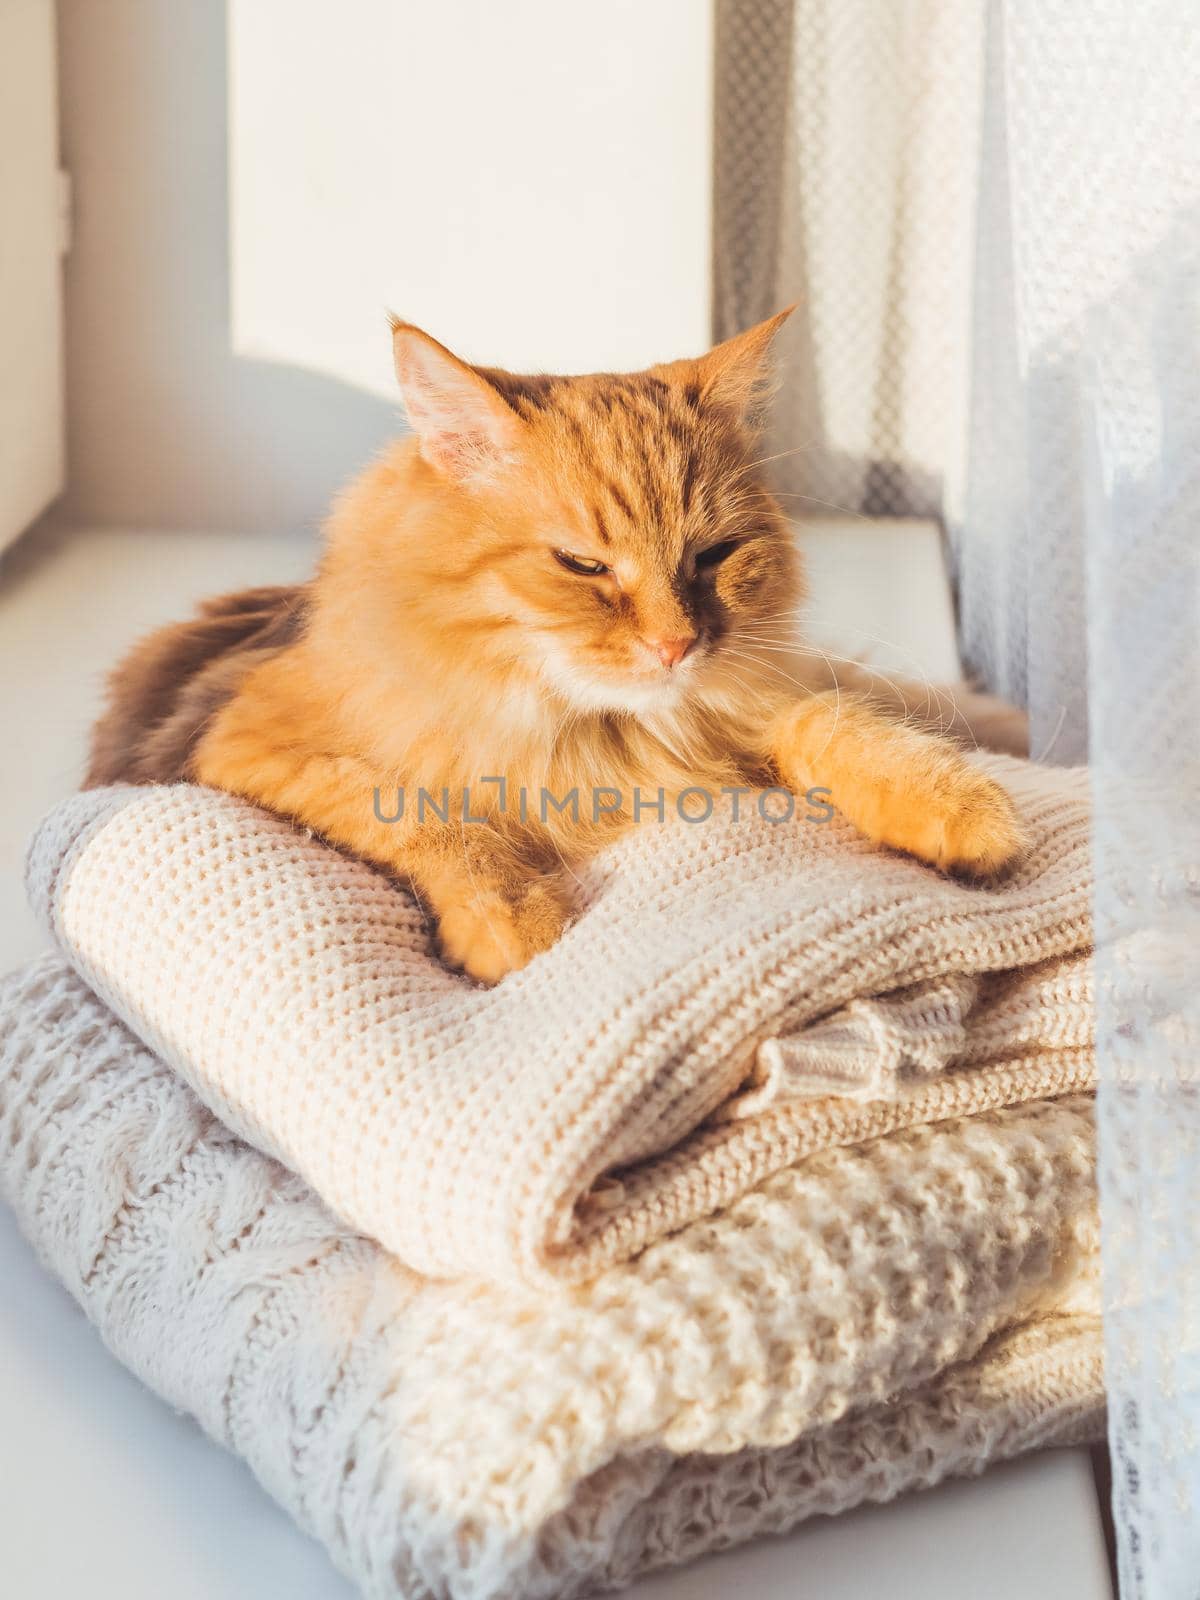 Cute ginger cat sleeps on pile of cable-knitted sweaters. Winter sunset. Fluffy pet on window sill with warm clothes.